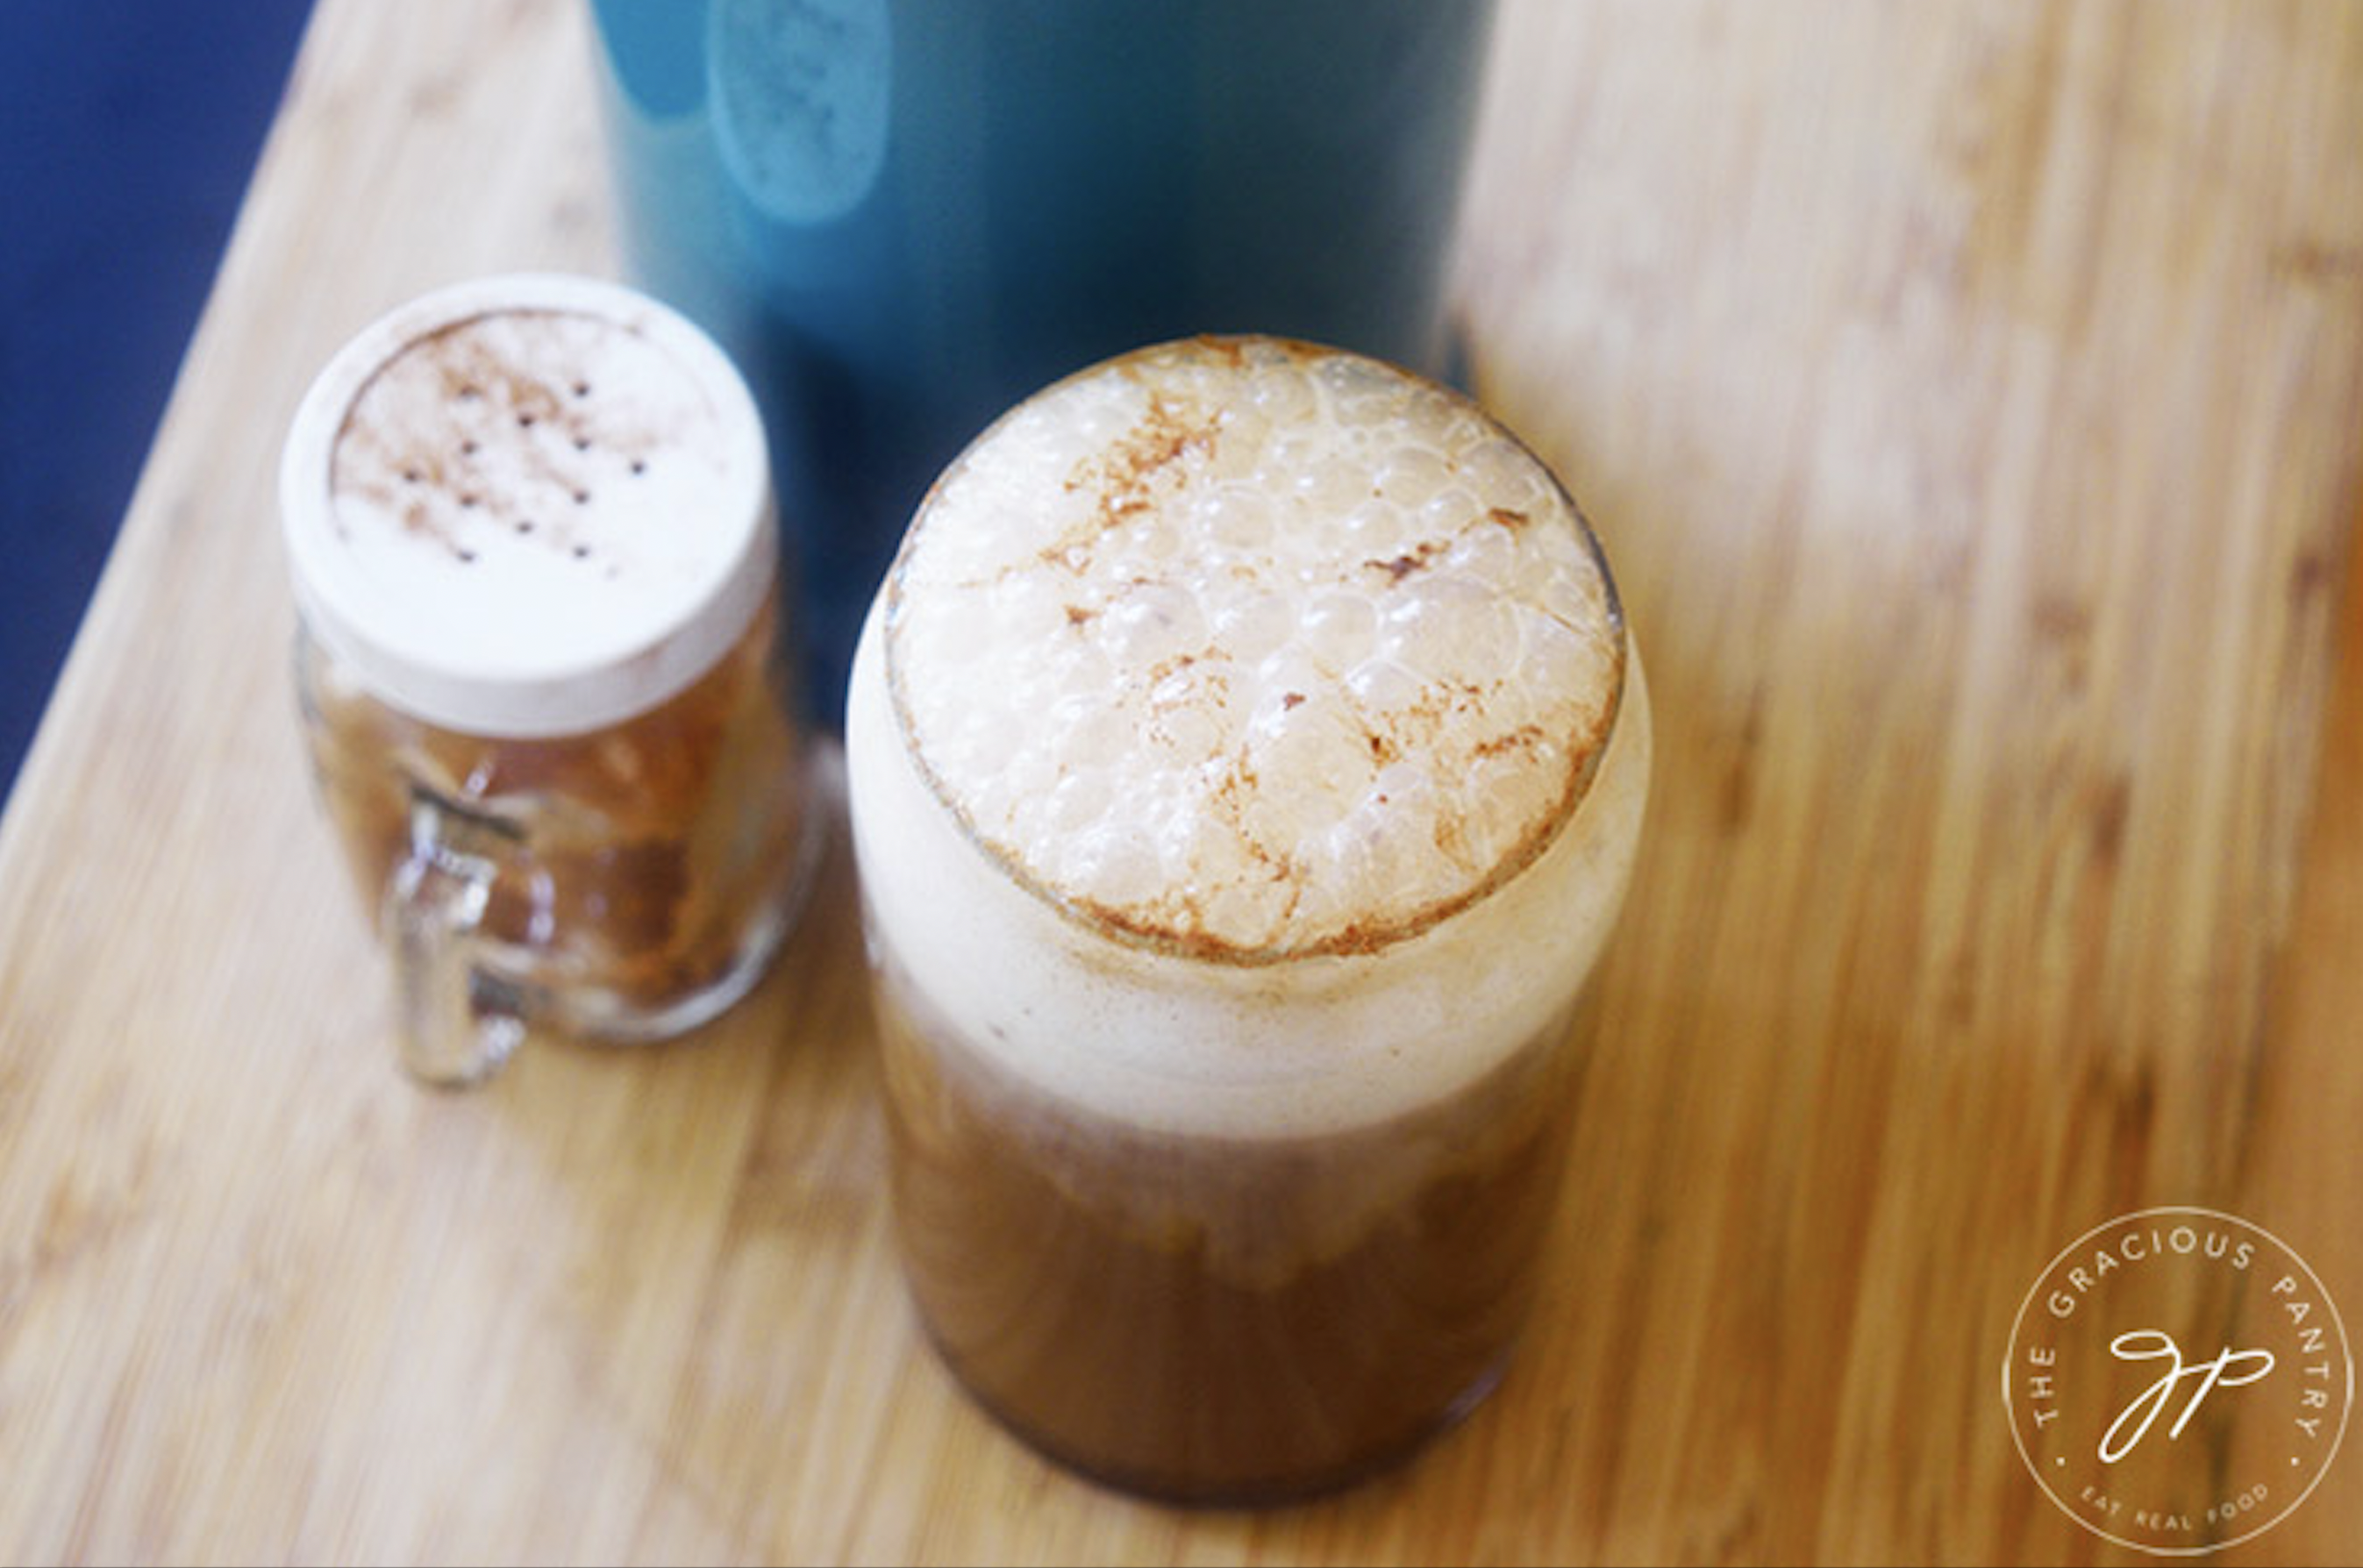 This is a delicious blend of your favorite coffee and your favorite fall spice.<p><b><a href="https://www.thegraciouspantry.com/clean-eating-pumpkin-spice-latte/">Get Recipe.</a></b></p><p><b>Related Slideshow: <a href="https://www.msn.com/en-us/health/wellness/The-15-healthiest-US-cities-for-families/ss-AASVQAg">The 15 healthiest US cities for families</a></b></p>